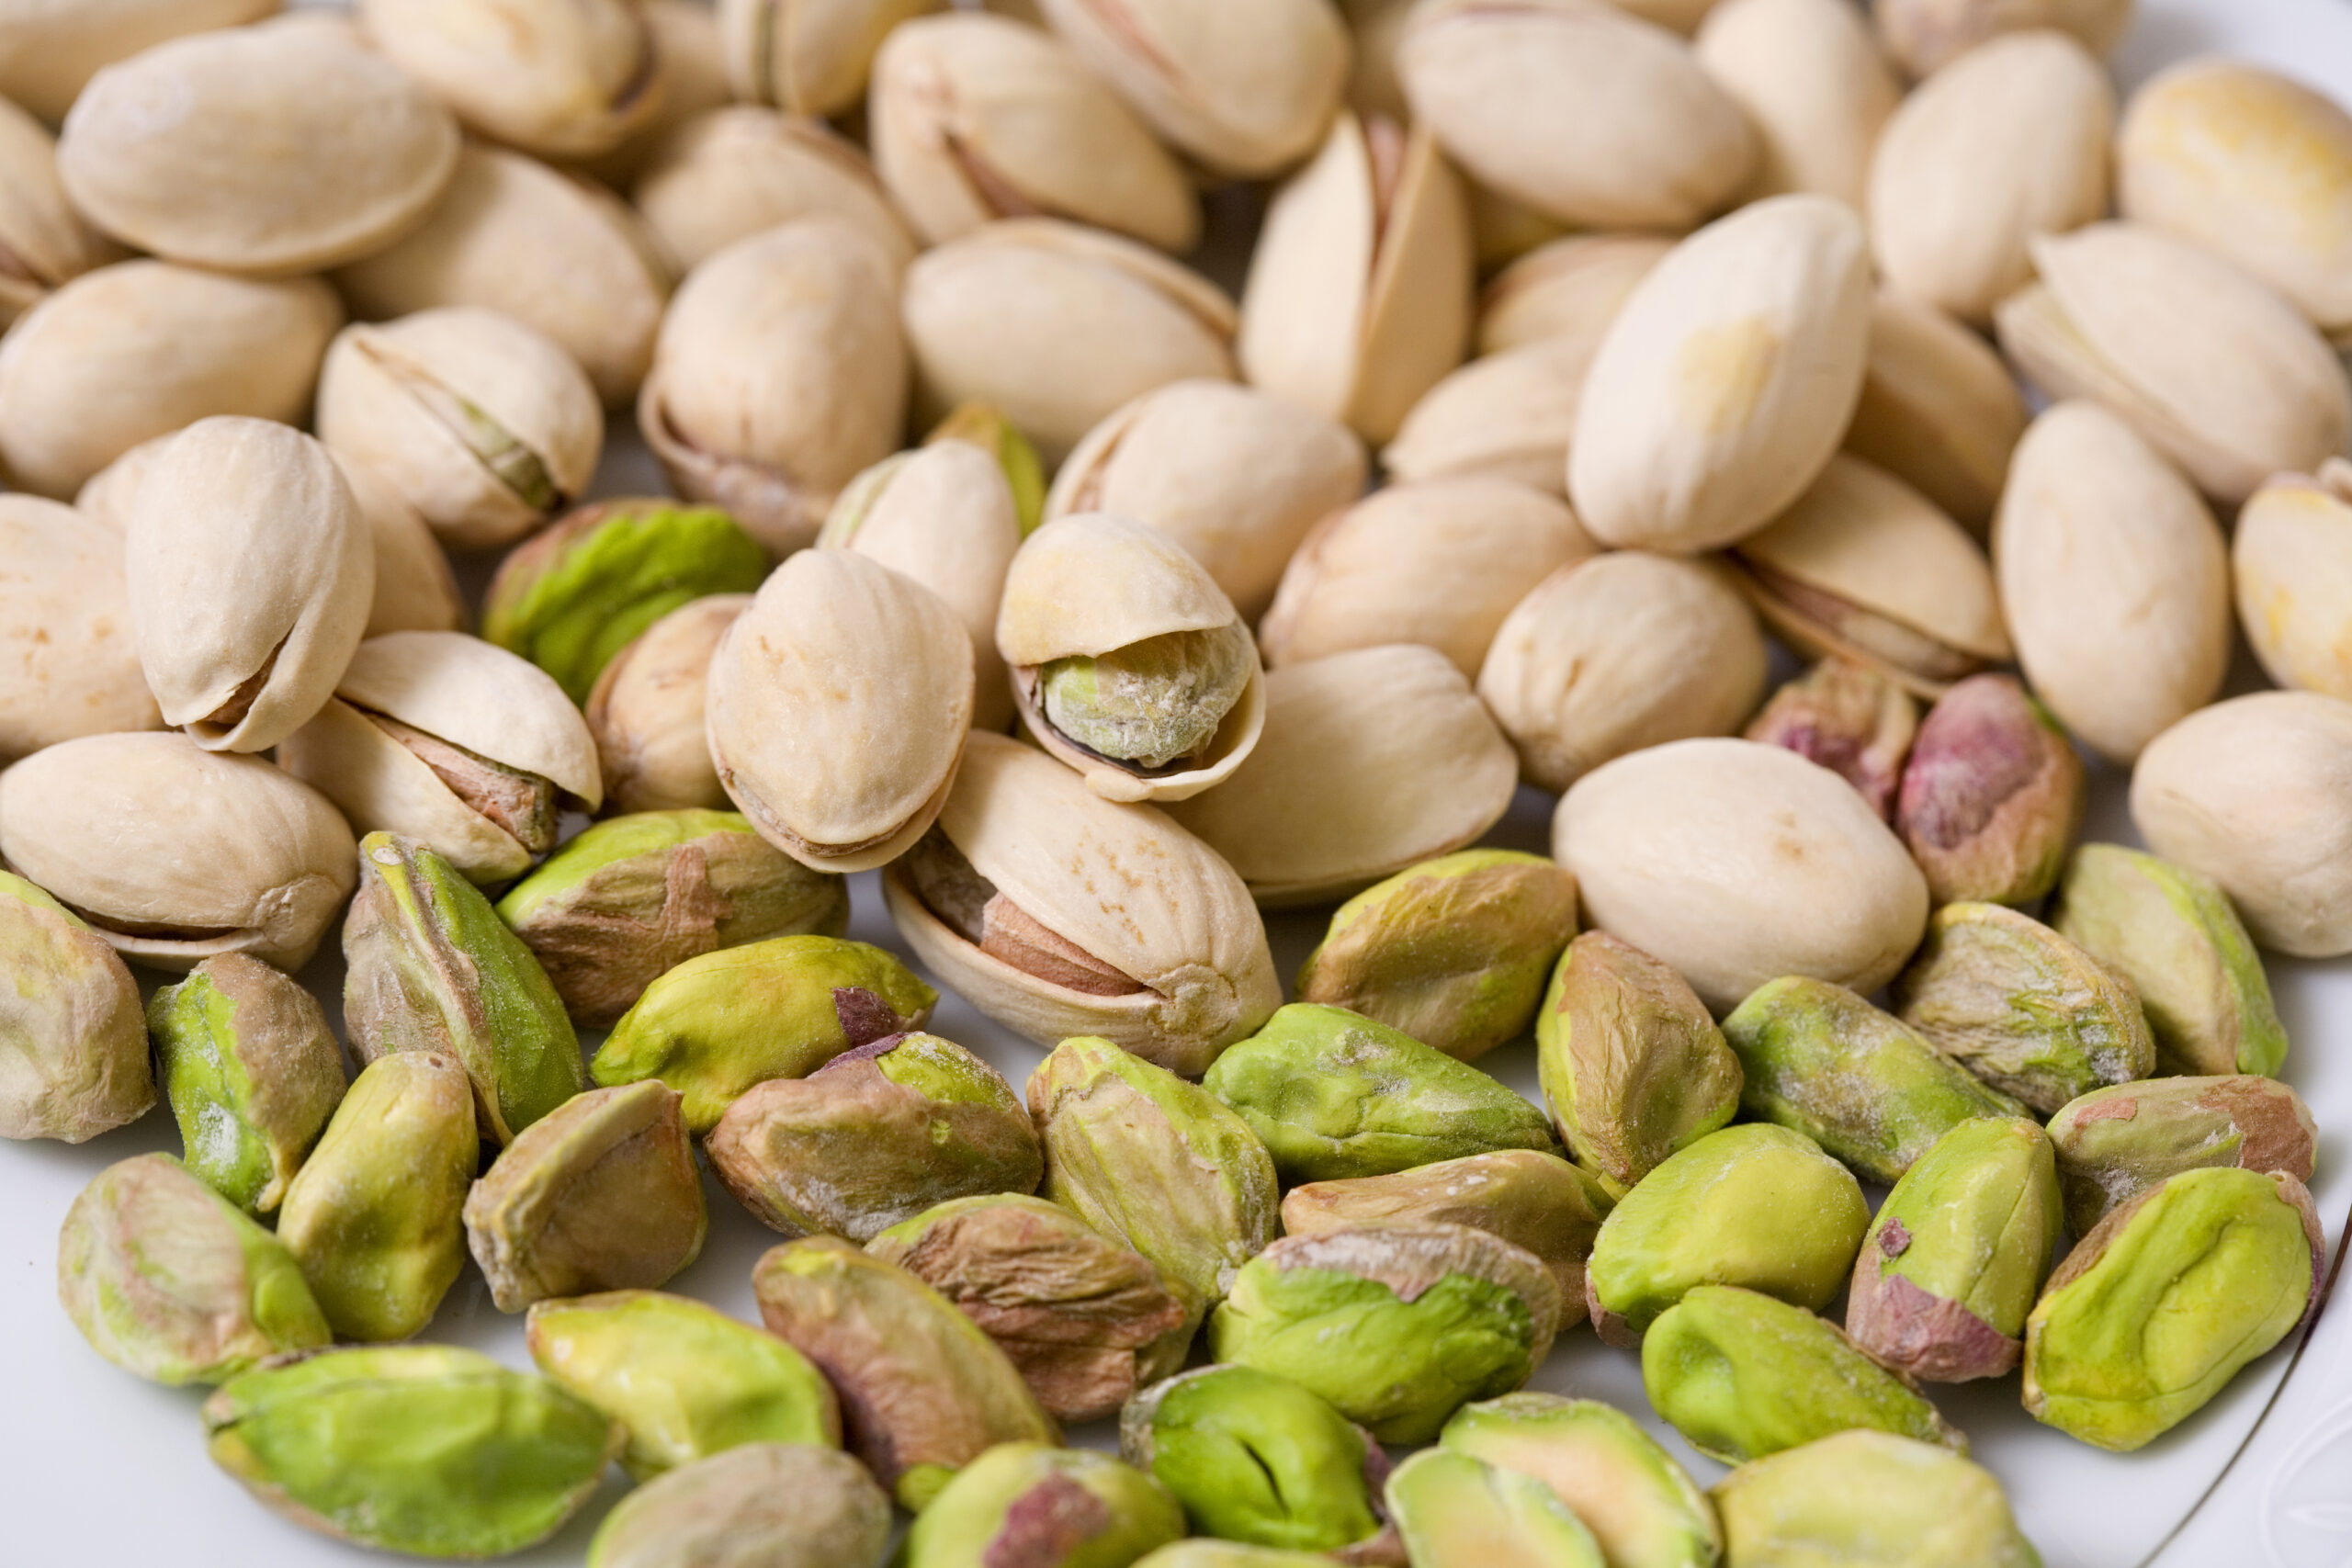 See the benefits of pistachios